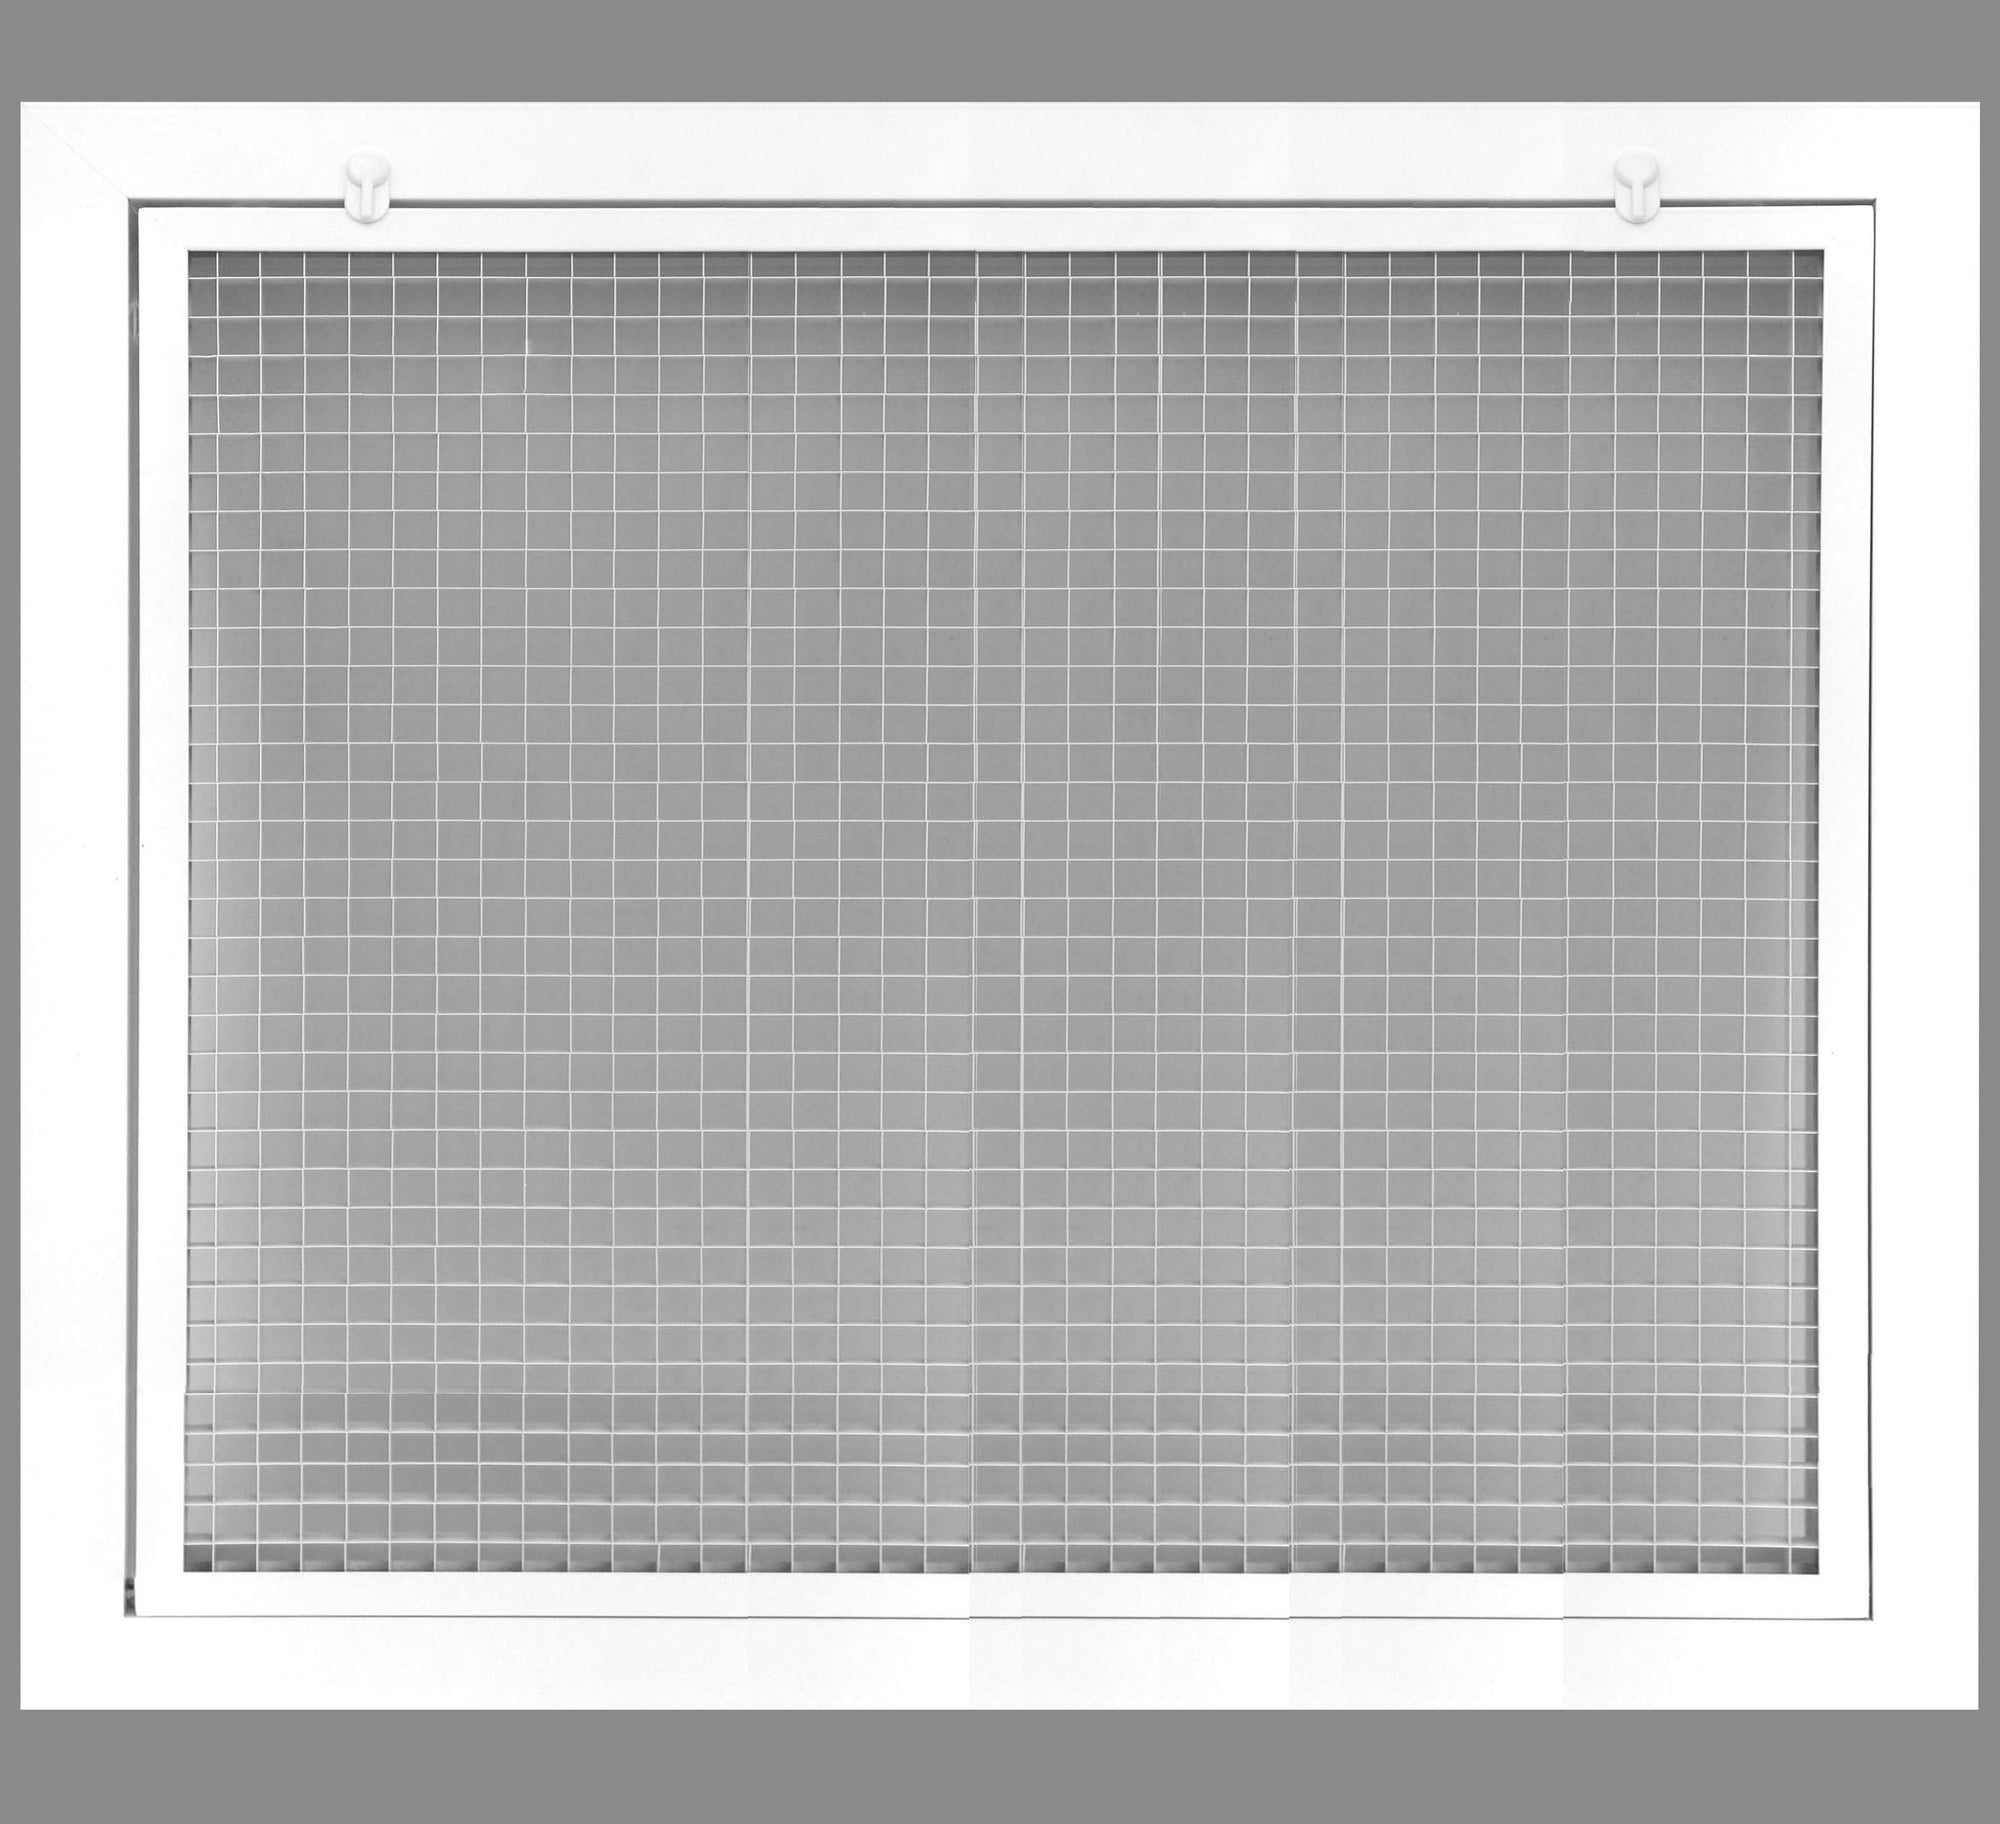 24" x 22" Cube Core Eggcrate Return Air Filter Grille for 1" Filter